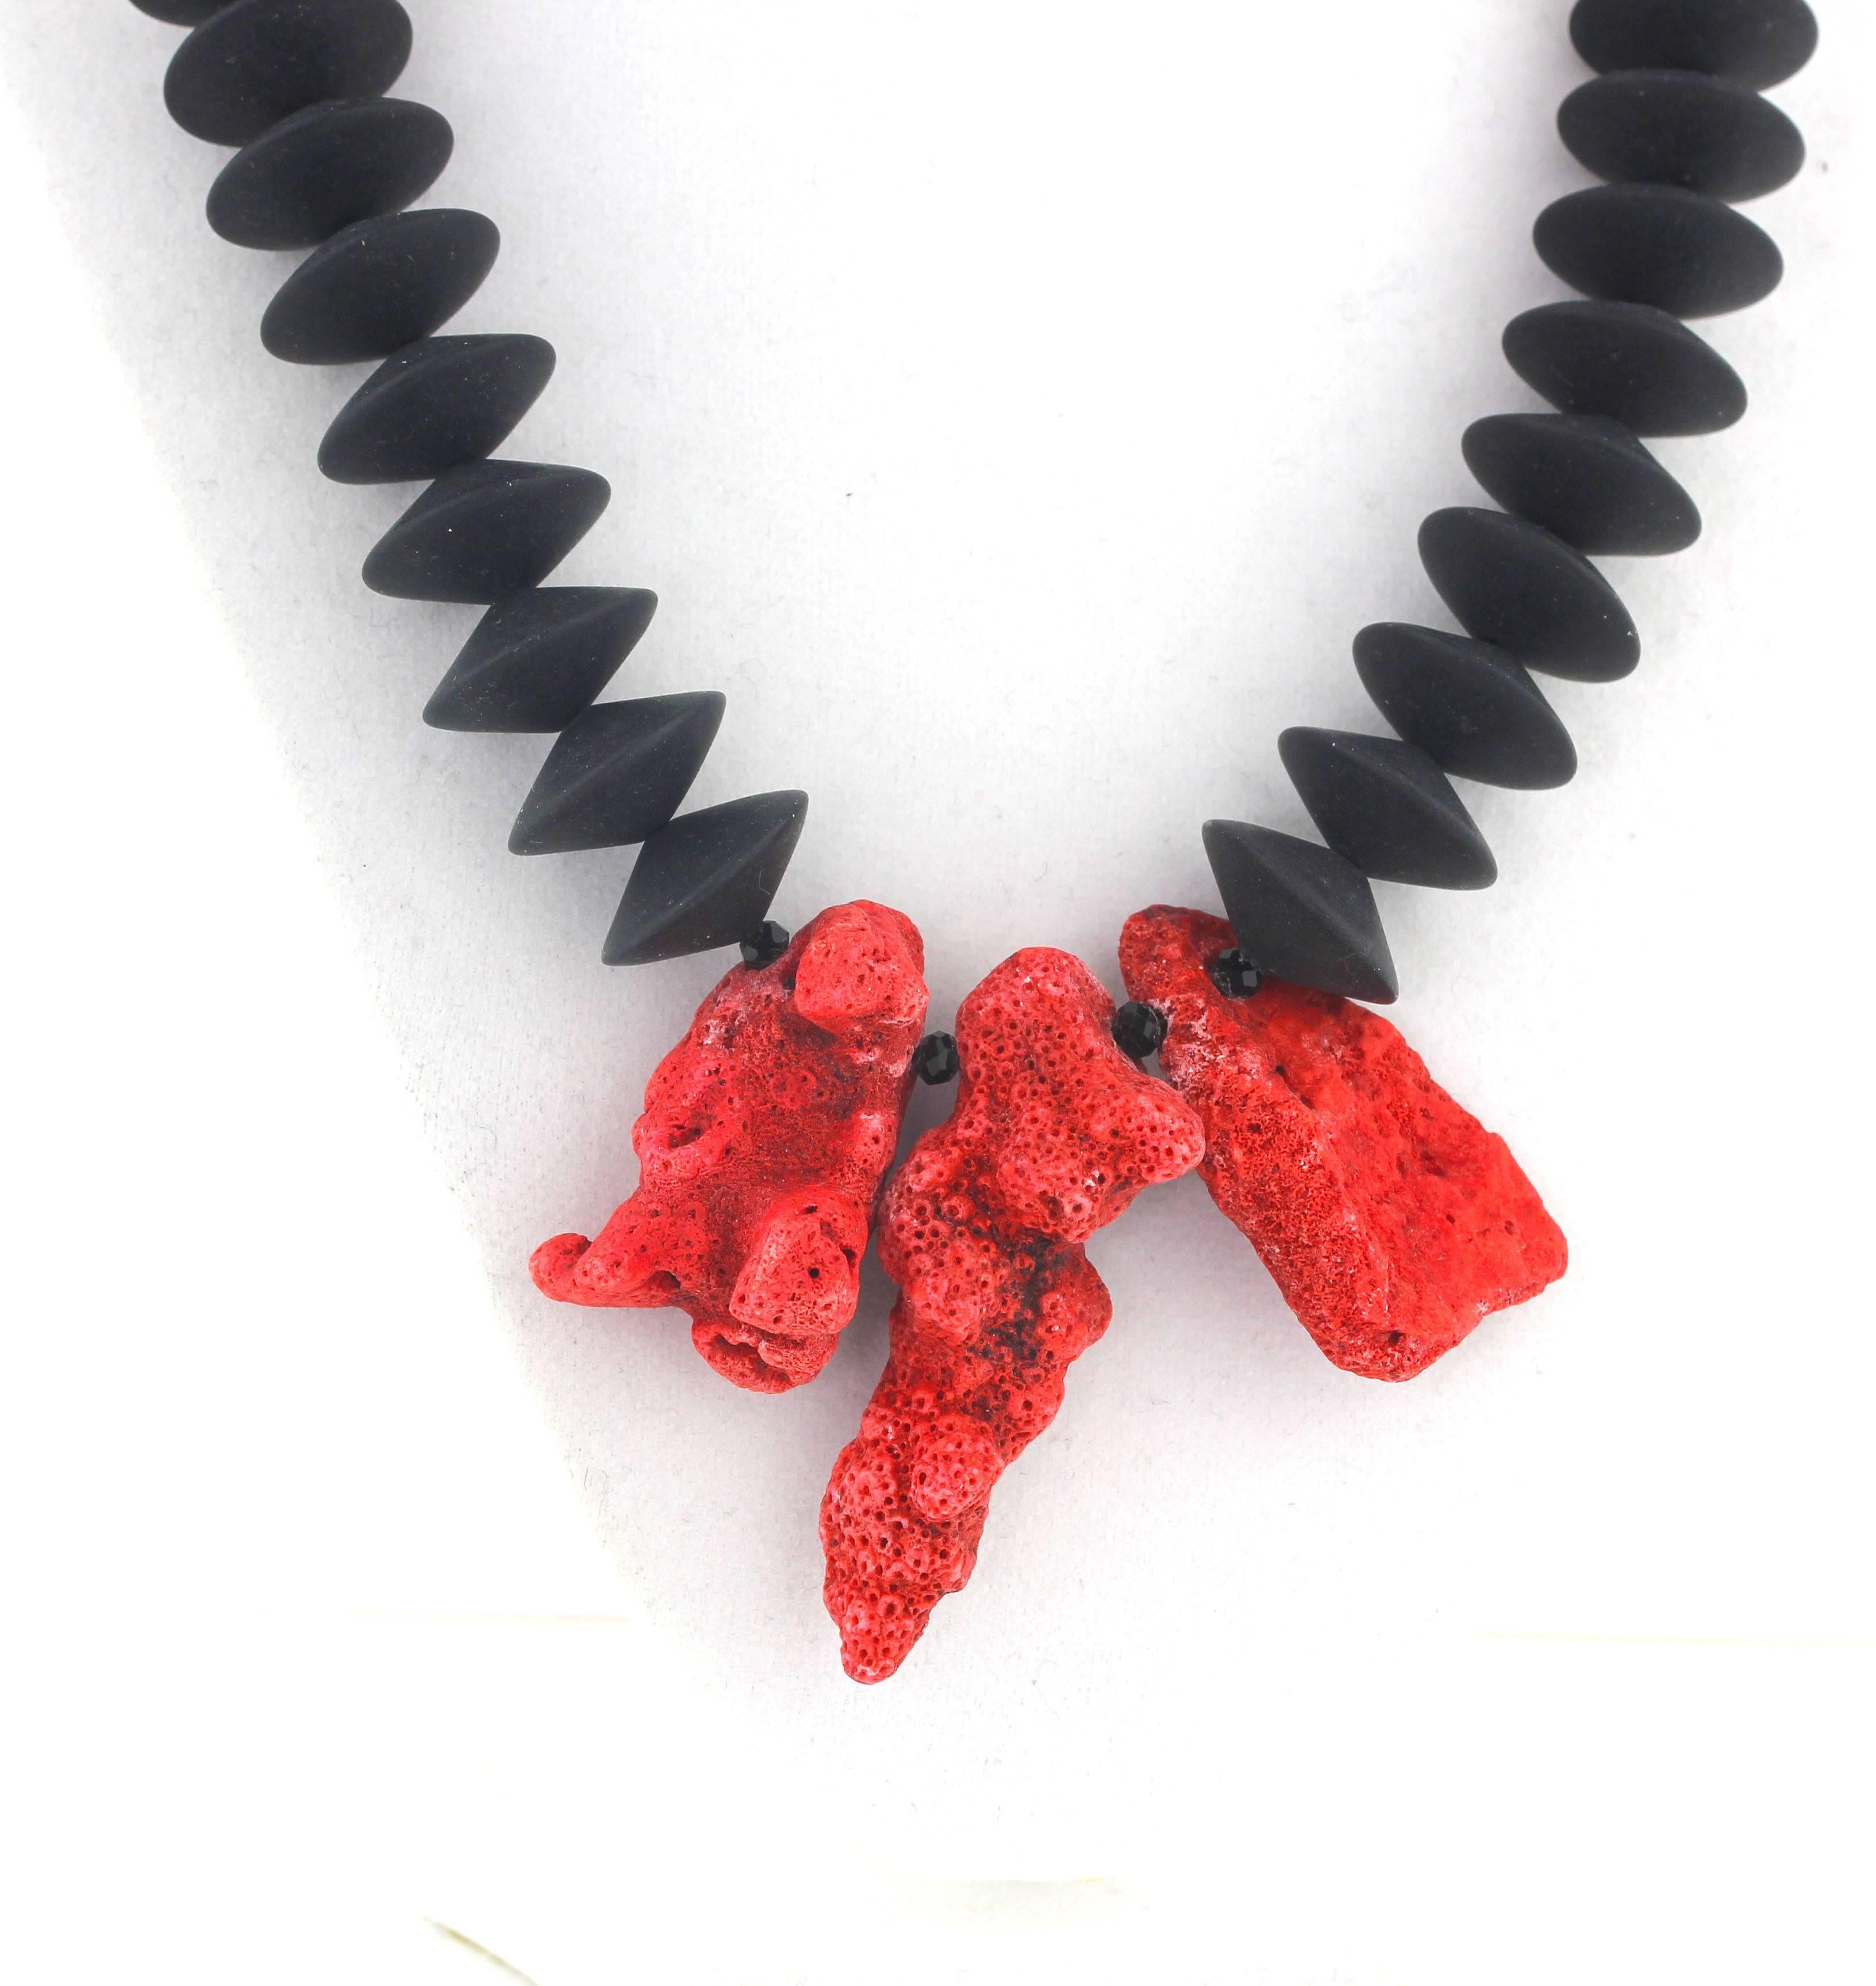 Super Elegant necklace of three large chunks of very rare unique Red Coral and gem cut flat black Onyx with tiny black Spinel accents compose this handmade necklace.  The longest  Red Coral is 57mm and the necklace is a pleasing 20 inches in length.